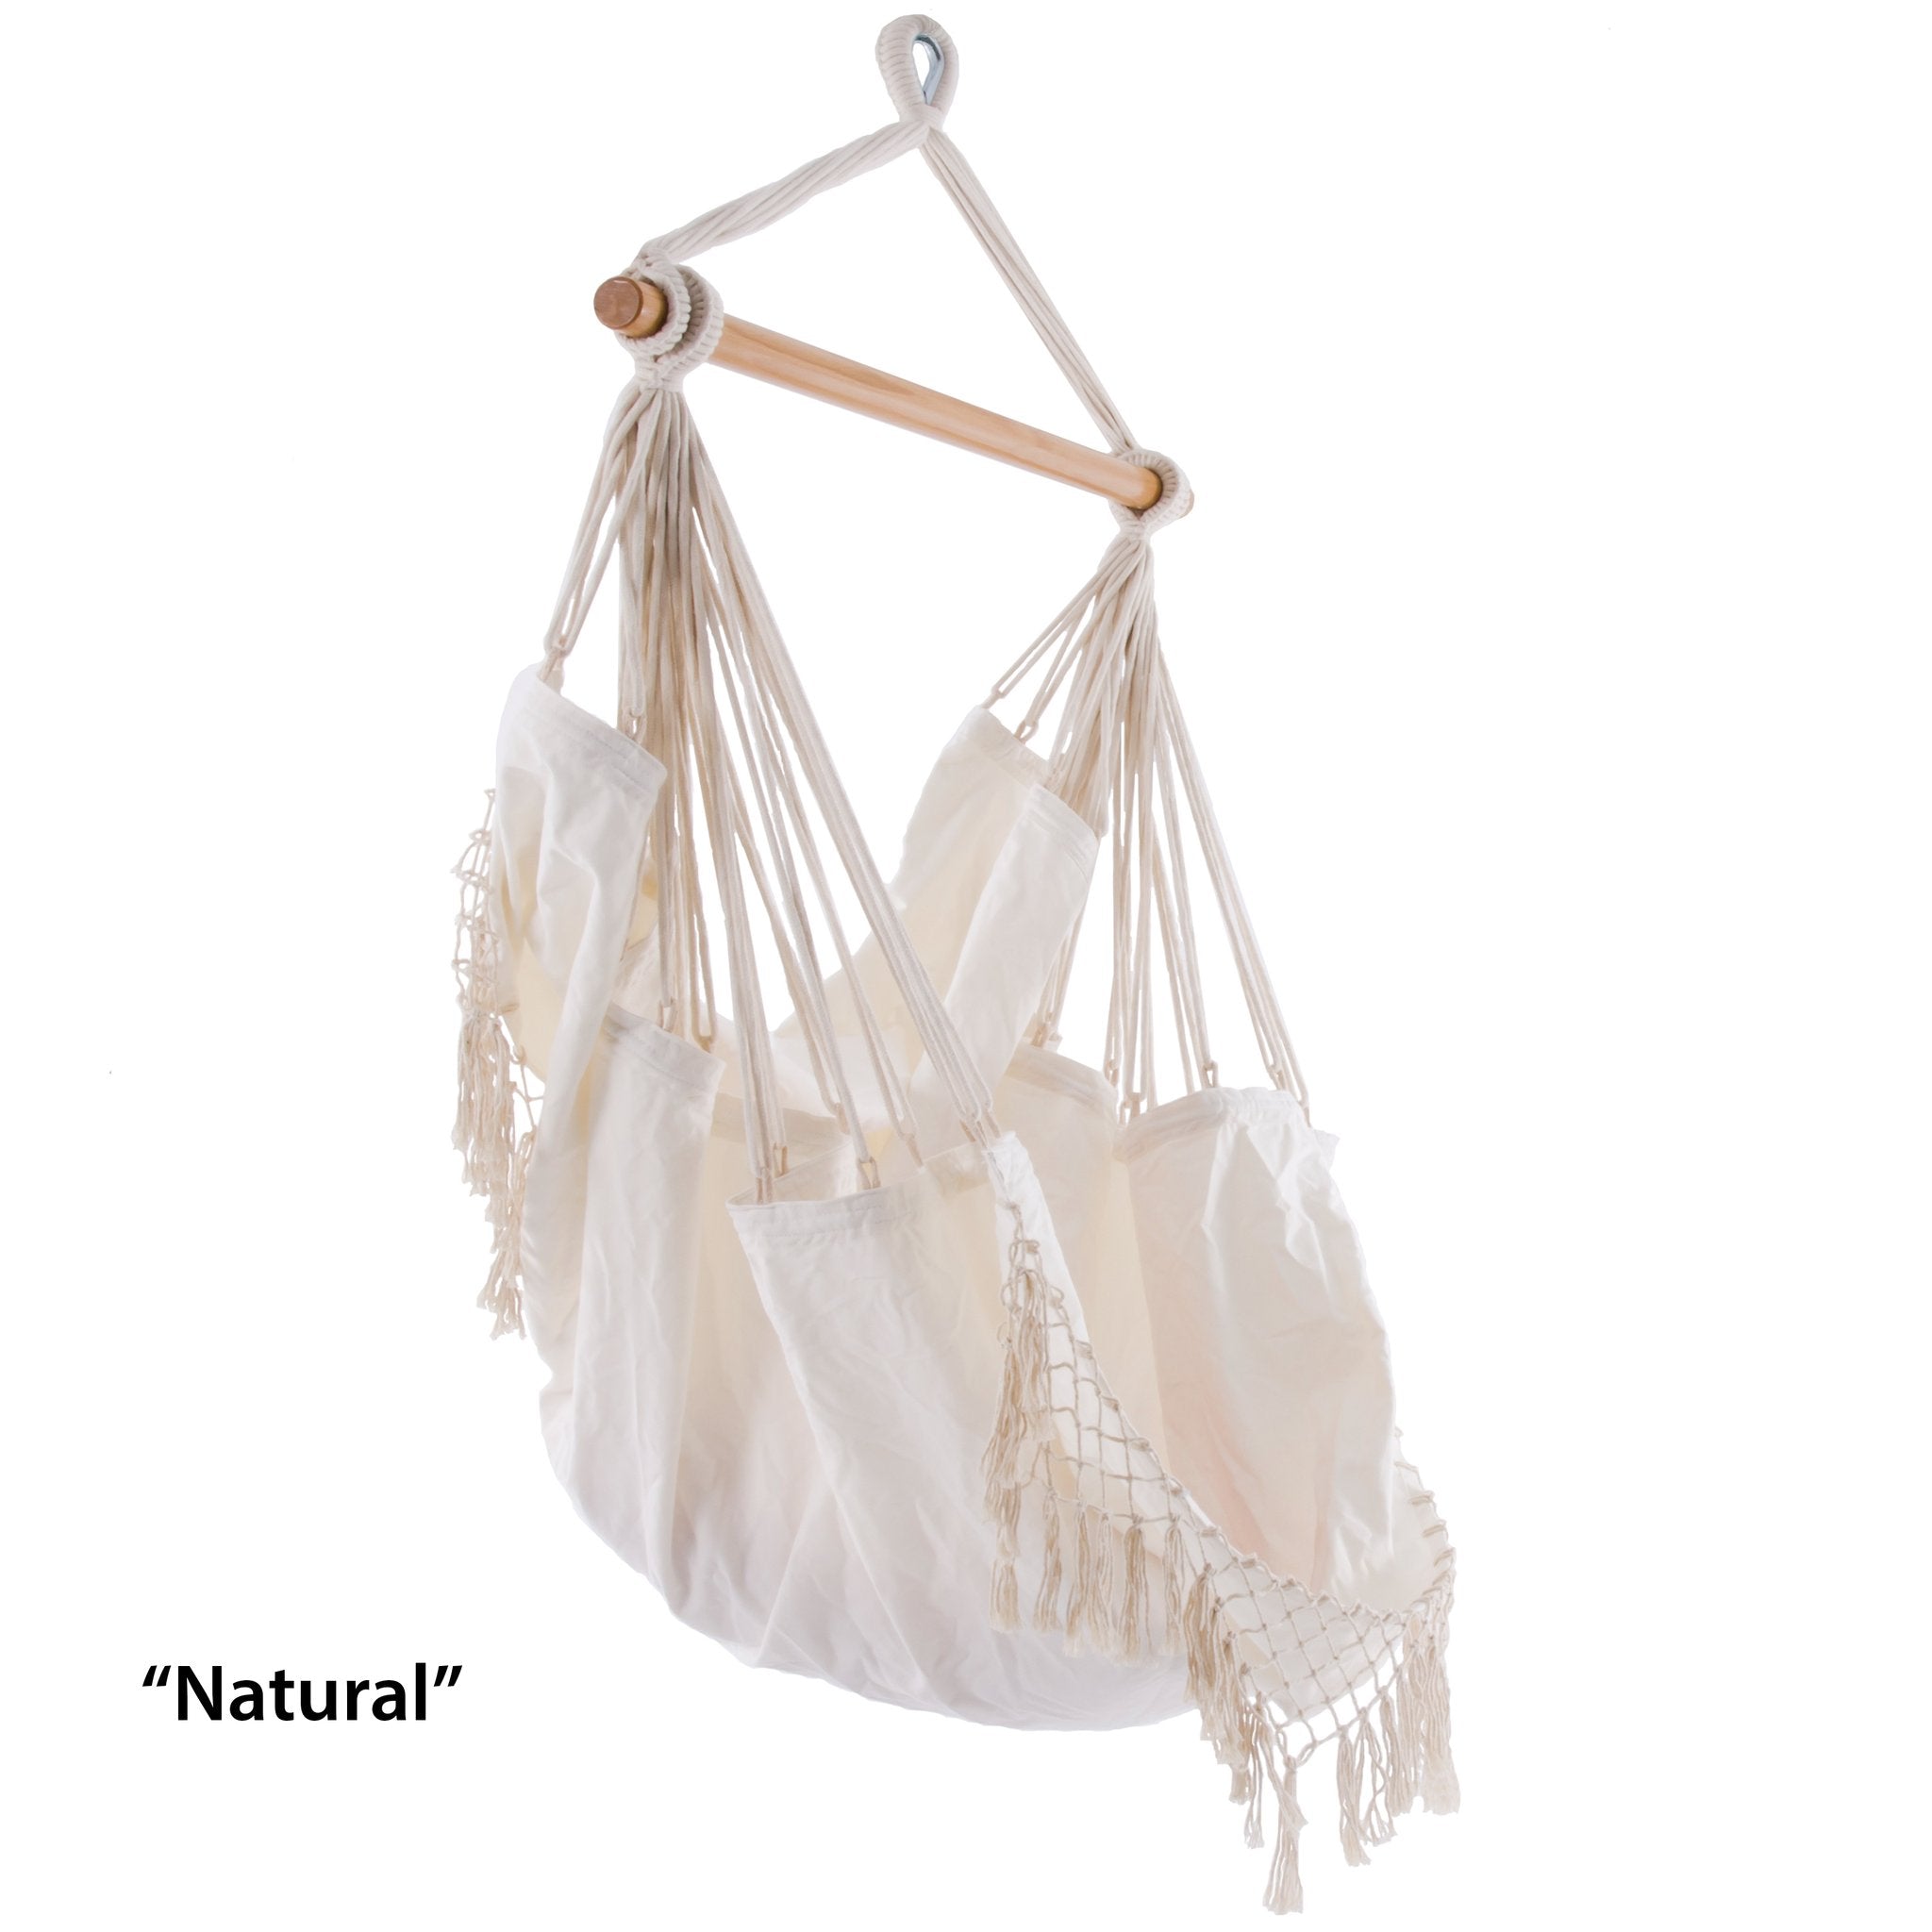 Brazilian Hanging Chair Natural with Fringe